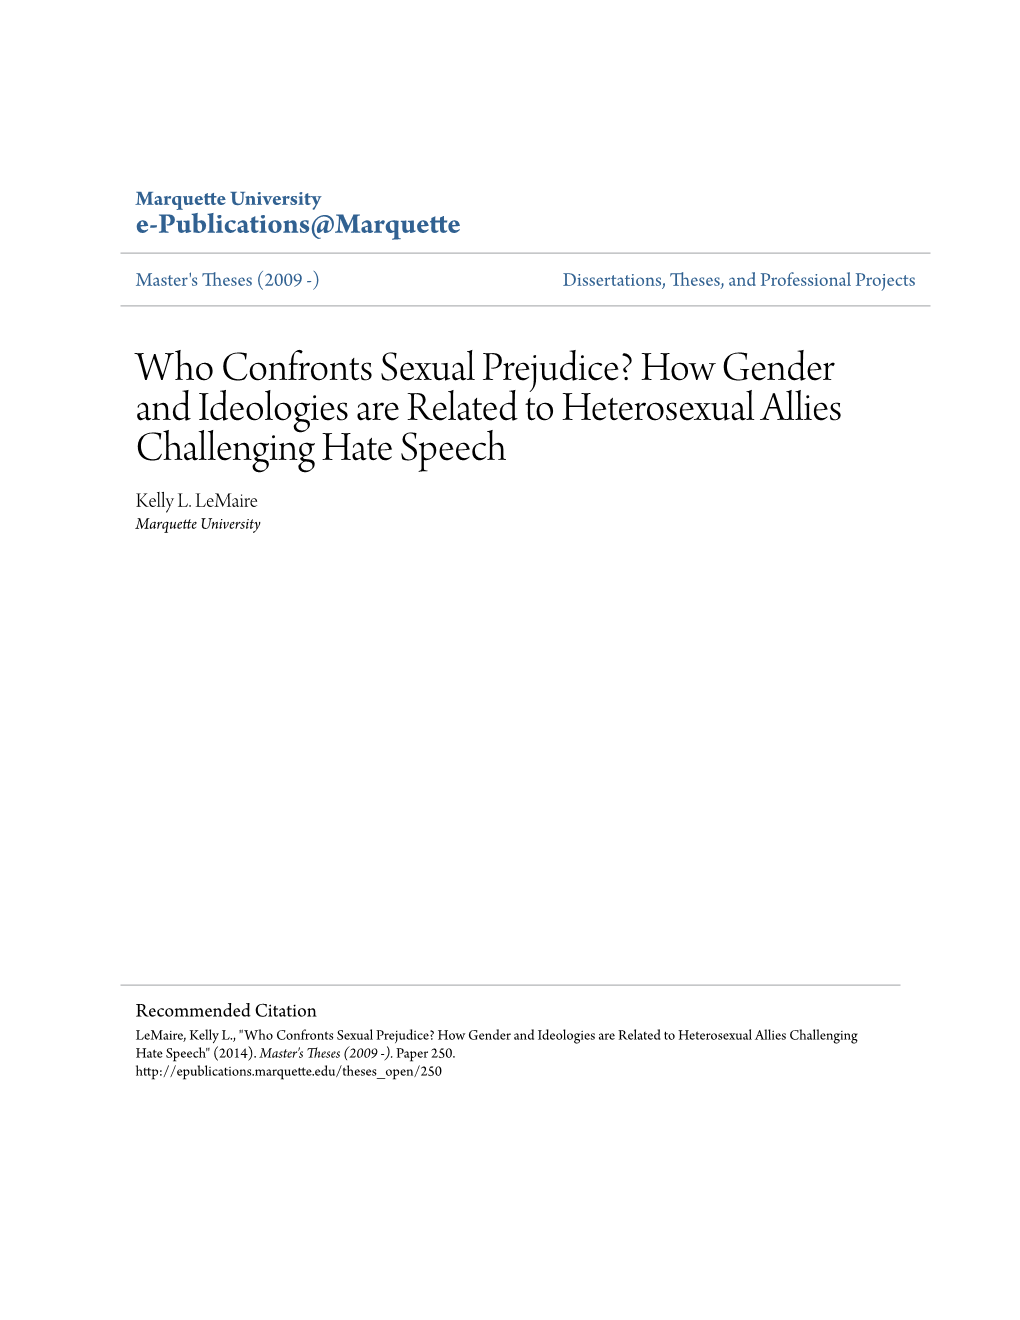 Who Confronts Sexual Prejudice? How Gender and Ideologies Are Related to Heterosexual Allies Challenging Hate Speech Kelly L